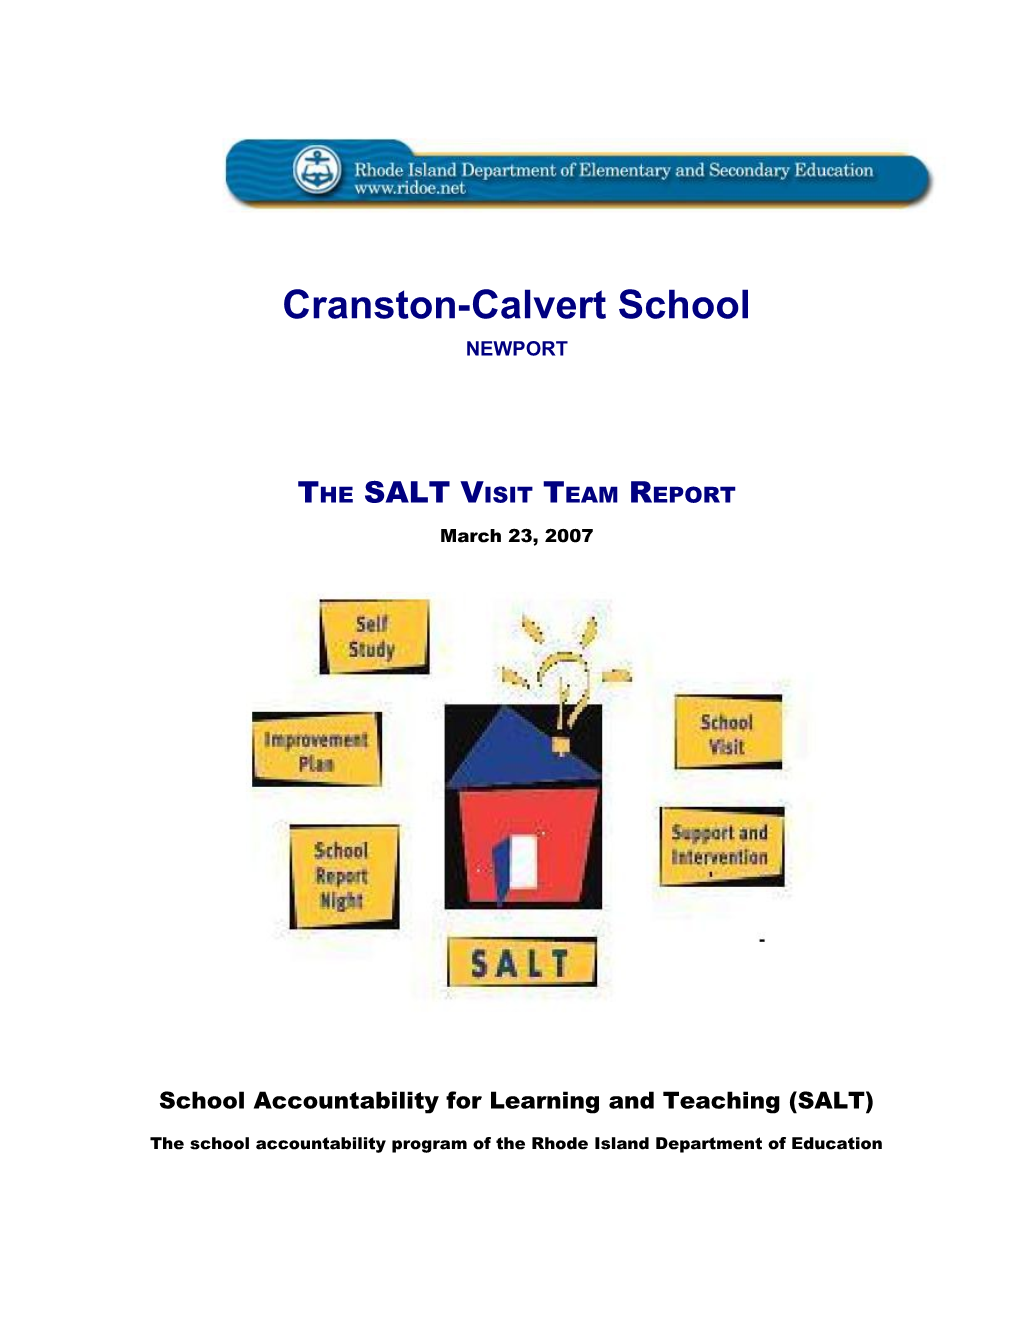 School Accountability for Learning and Teaching (SALT) s1